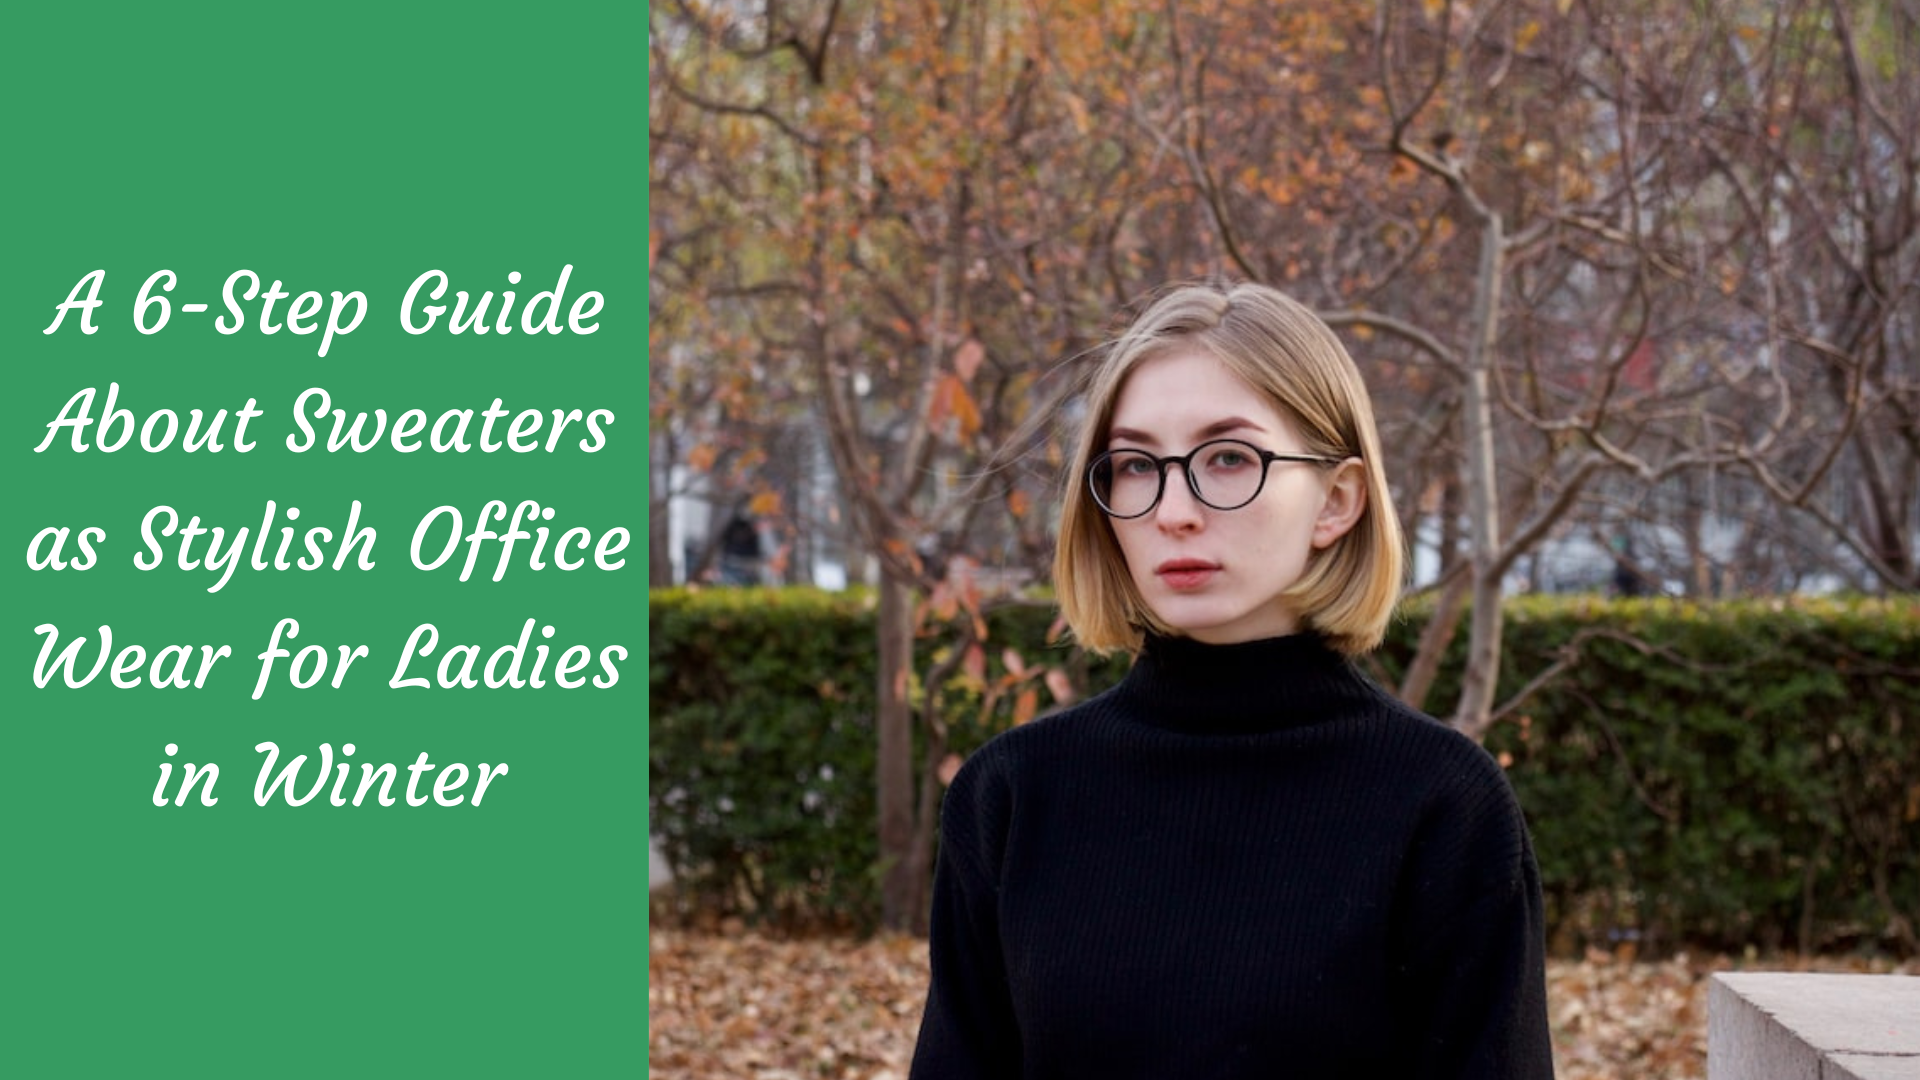 A 6-Step Guide About Sweaters as Stylish Office Wear for Ladies in Winter -  The Kosha Journal